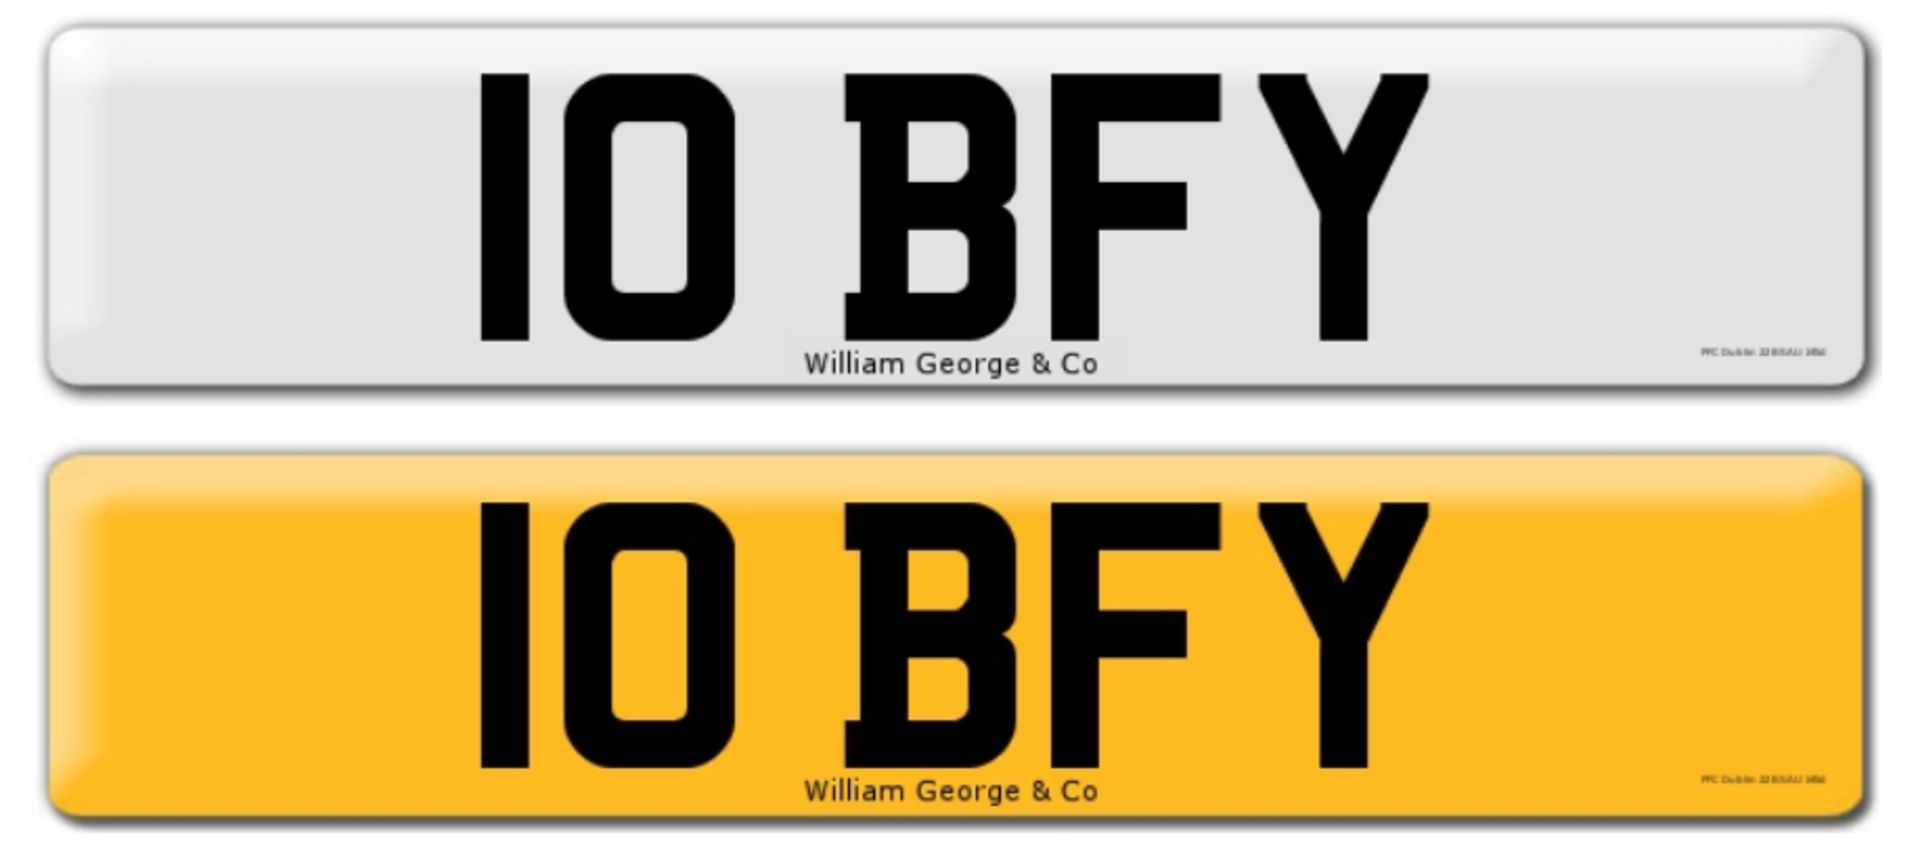 Registration on DVLA retention certificate, ready to transfer 10 BFY, This number plate /